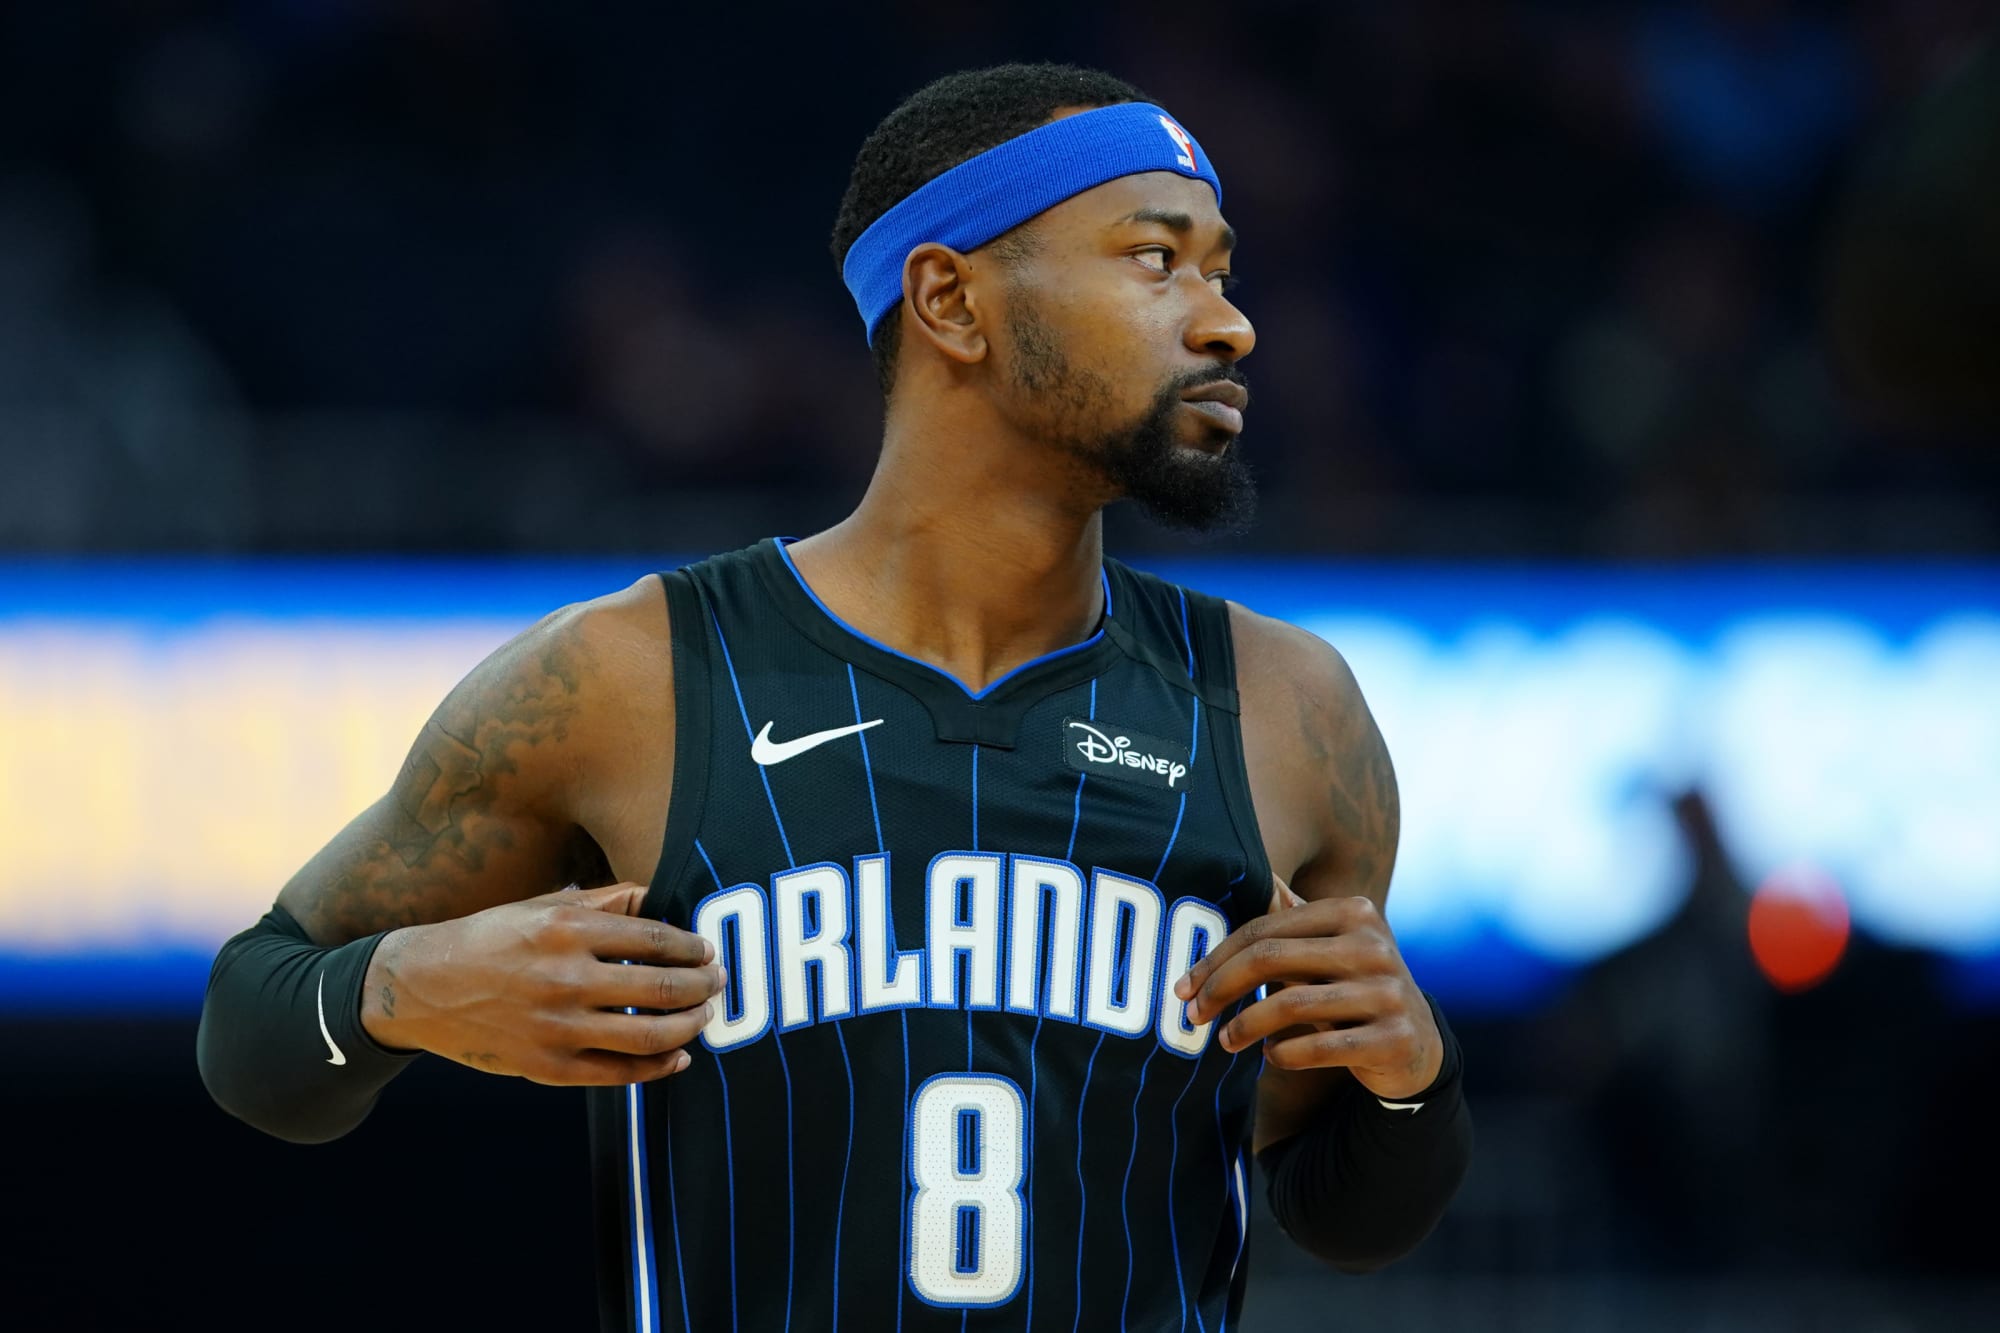 Miami Heat Terrence Ross traded to Heat in B/R article